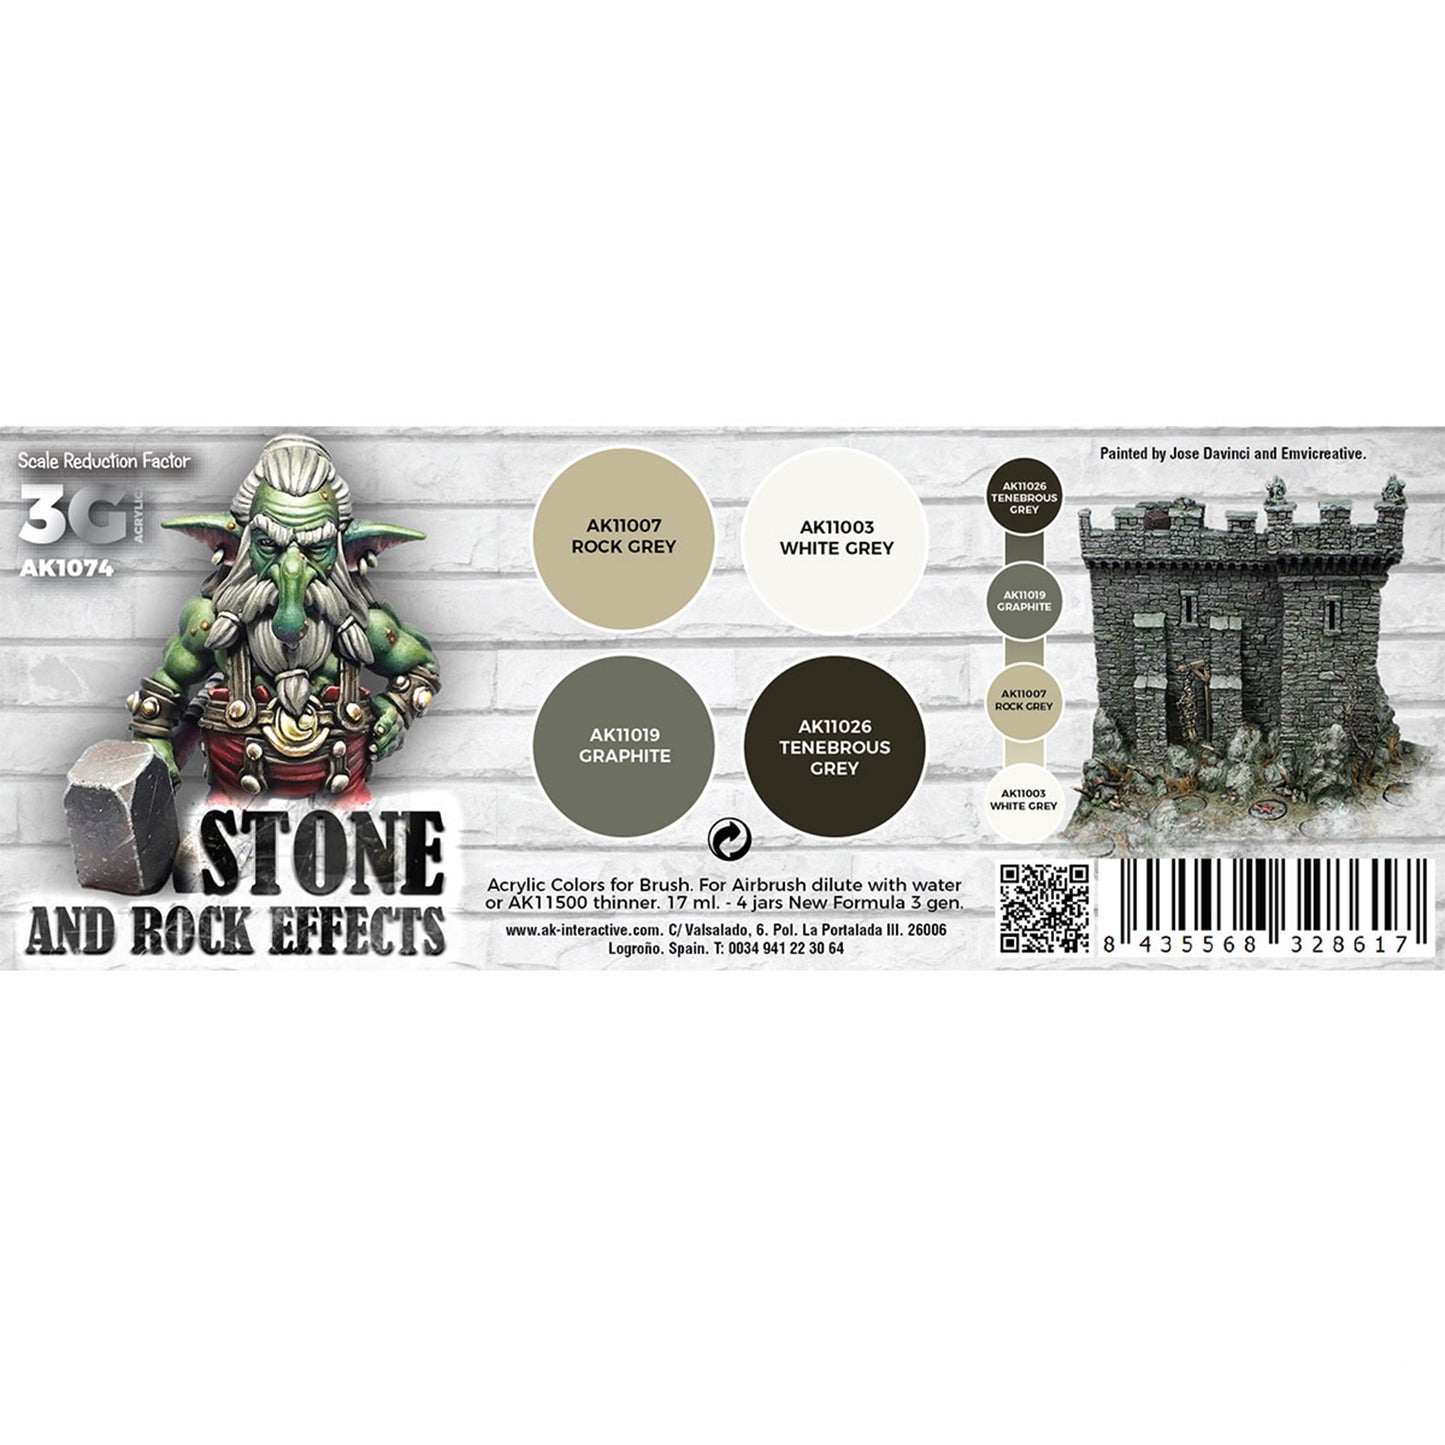 3rd Generation Acrylics - Wargame Colors Stone and Rock Effects Set by AK-Interactive